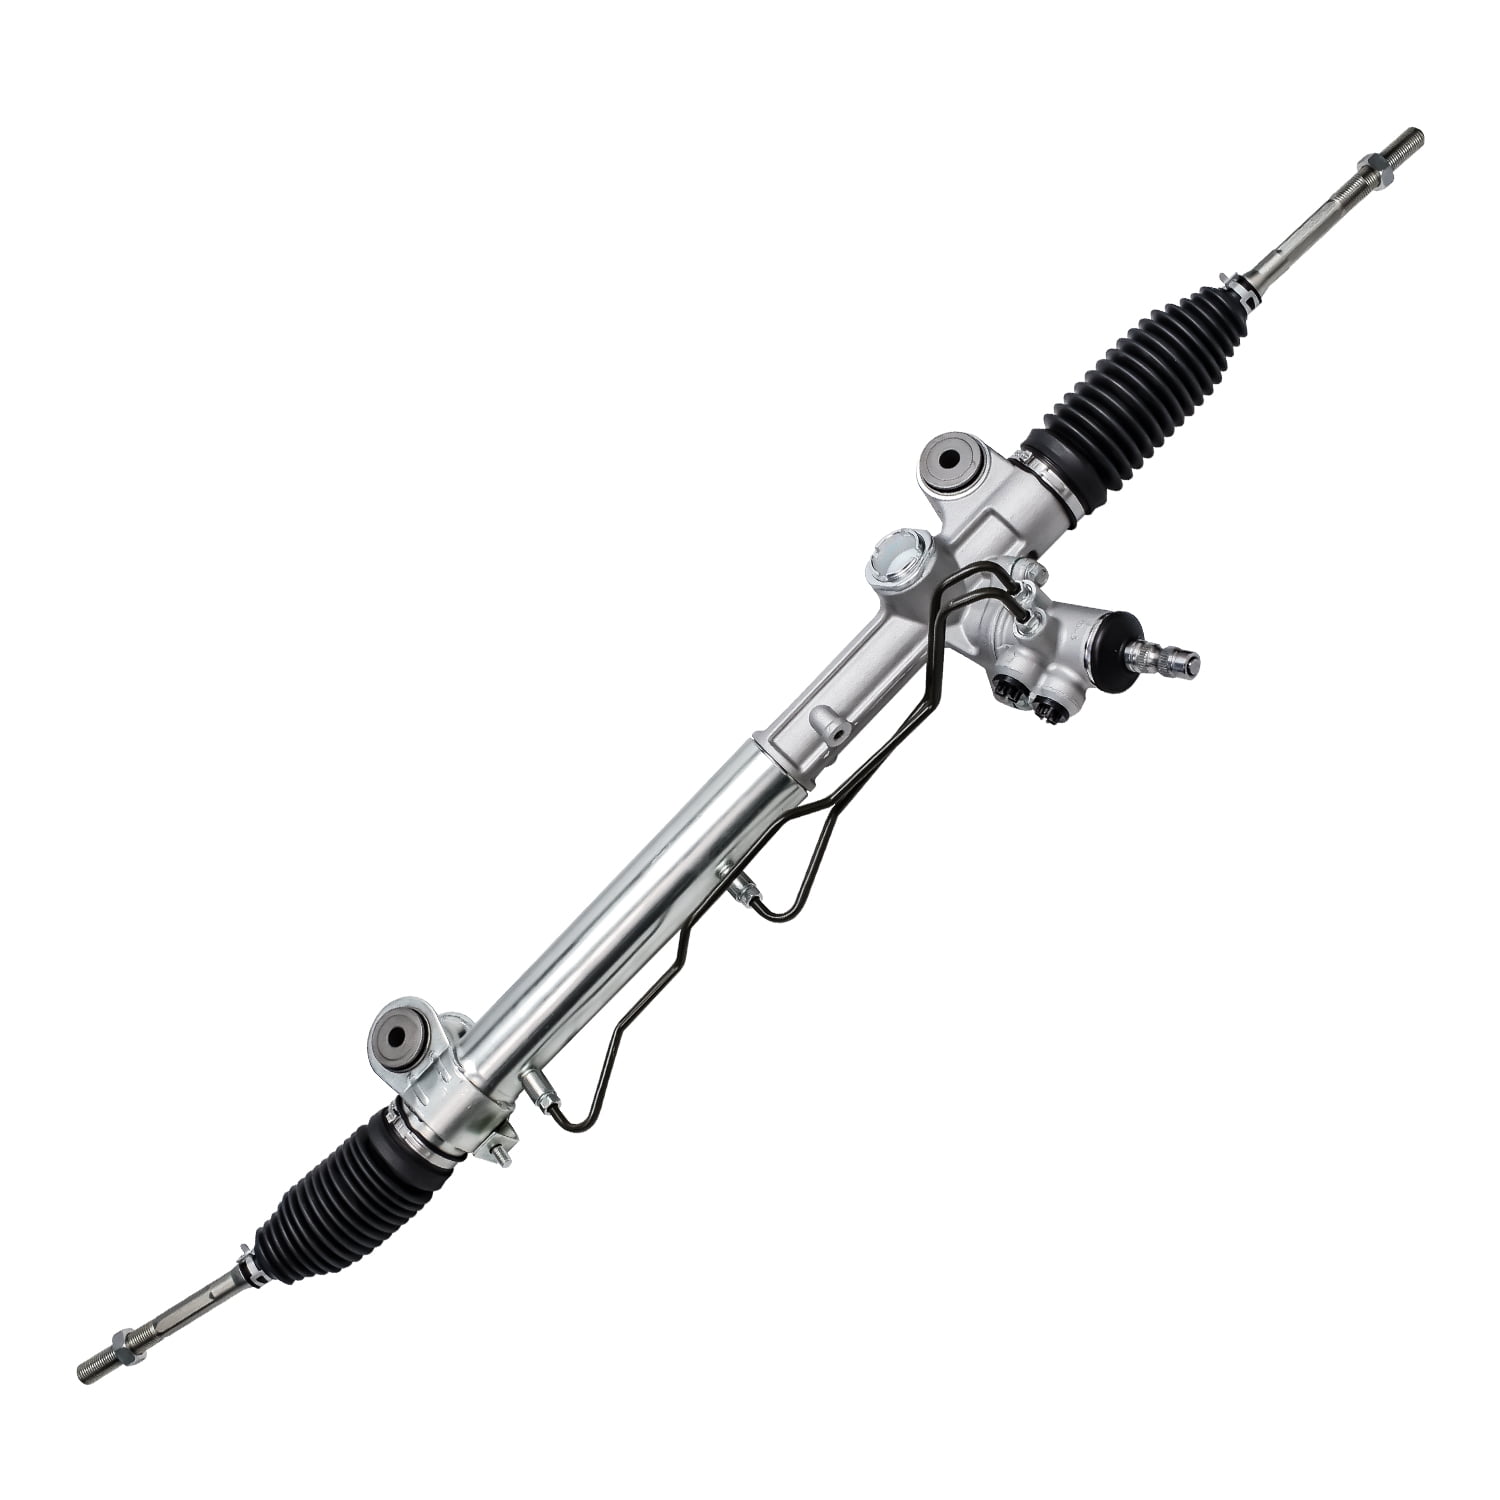 Detroit Axle Complete Power Steering Rack & Pinion Assembly for Lexus ES300 & Toyota Camry Avalon Solara 